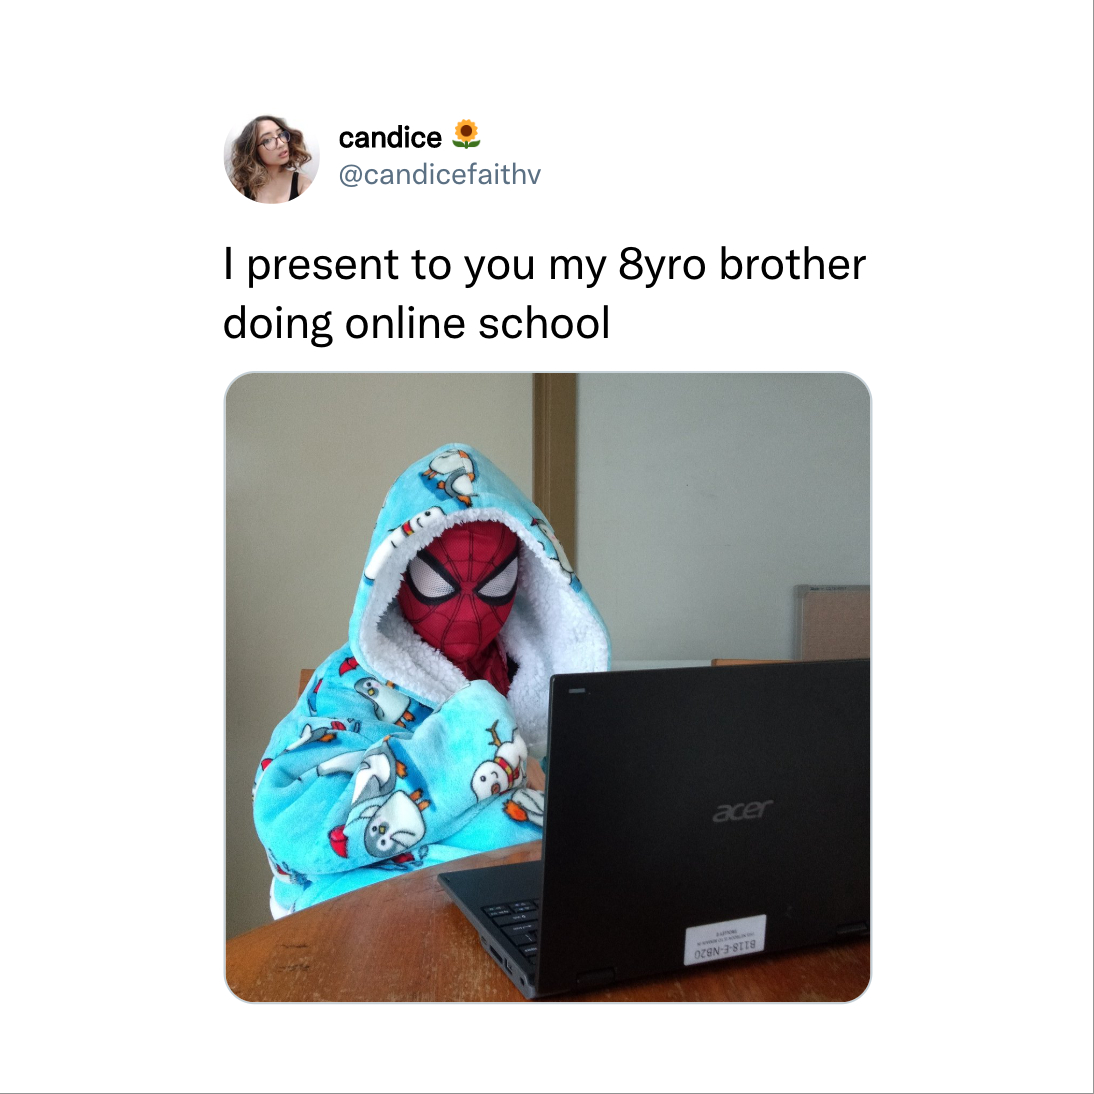 communication - candice present to you my 8yro brother doing online school